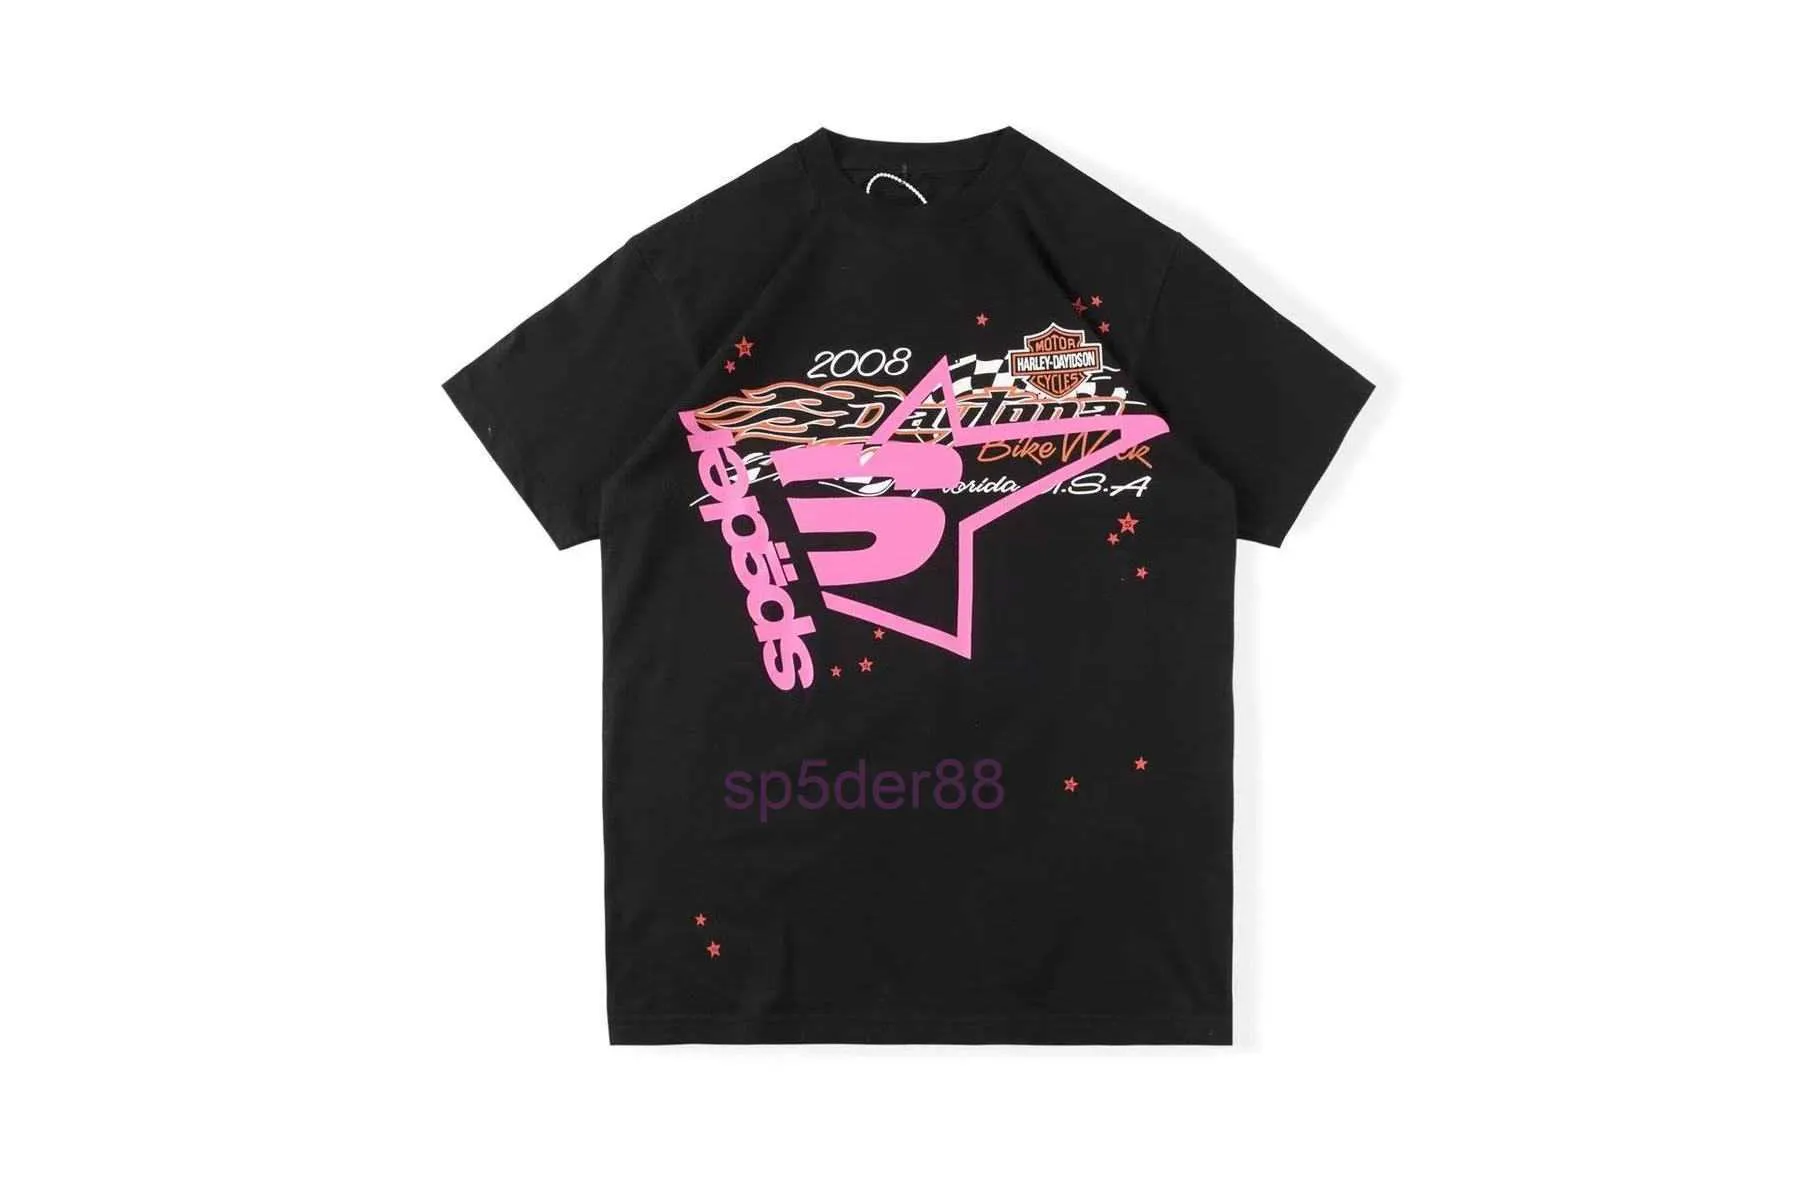 Men's T-shirts Y2k t Shirts Spider 555 Hip Hop Kanyes Style Sp5der 555555 Tshirt Spiders Jumper European and American Young Singers Short Sleeve Kgds BE5M BE5M